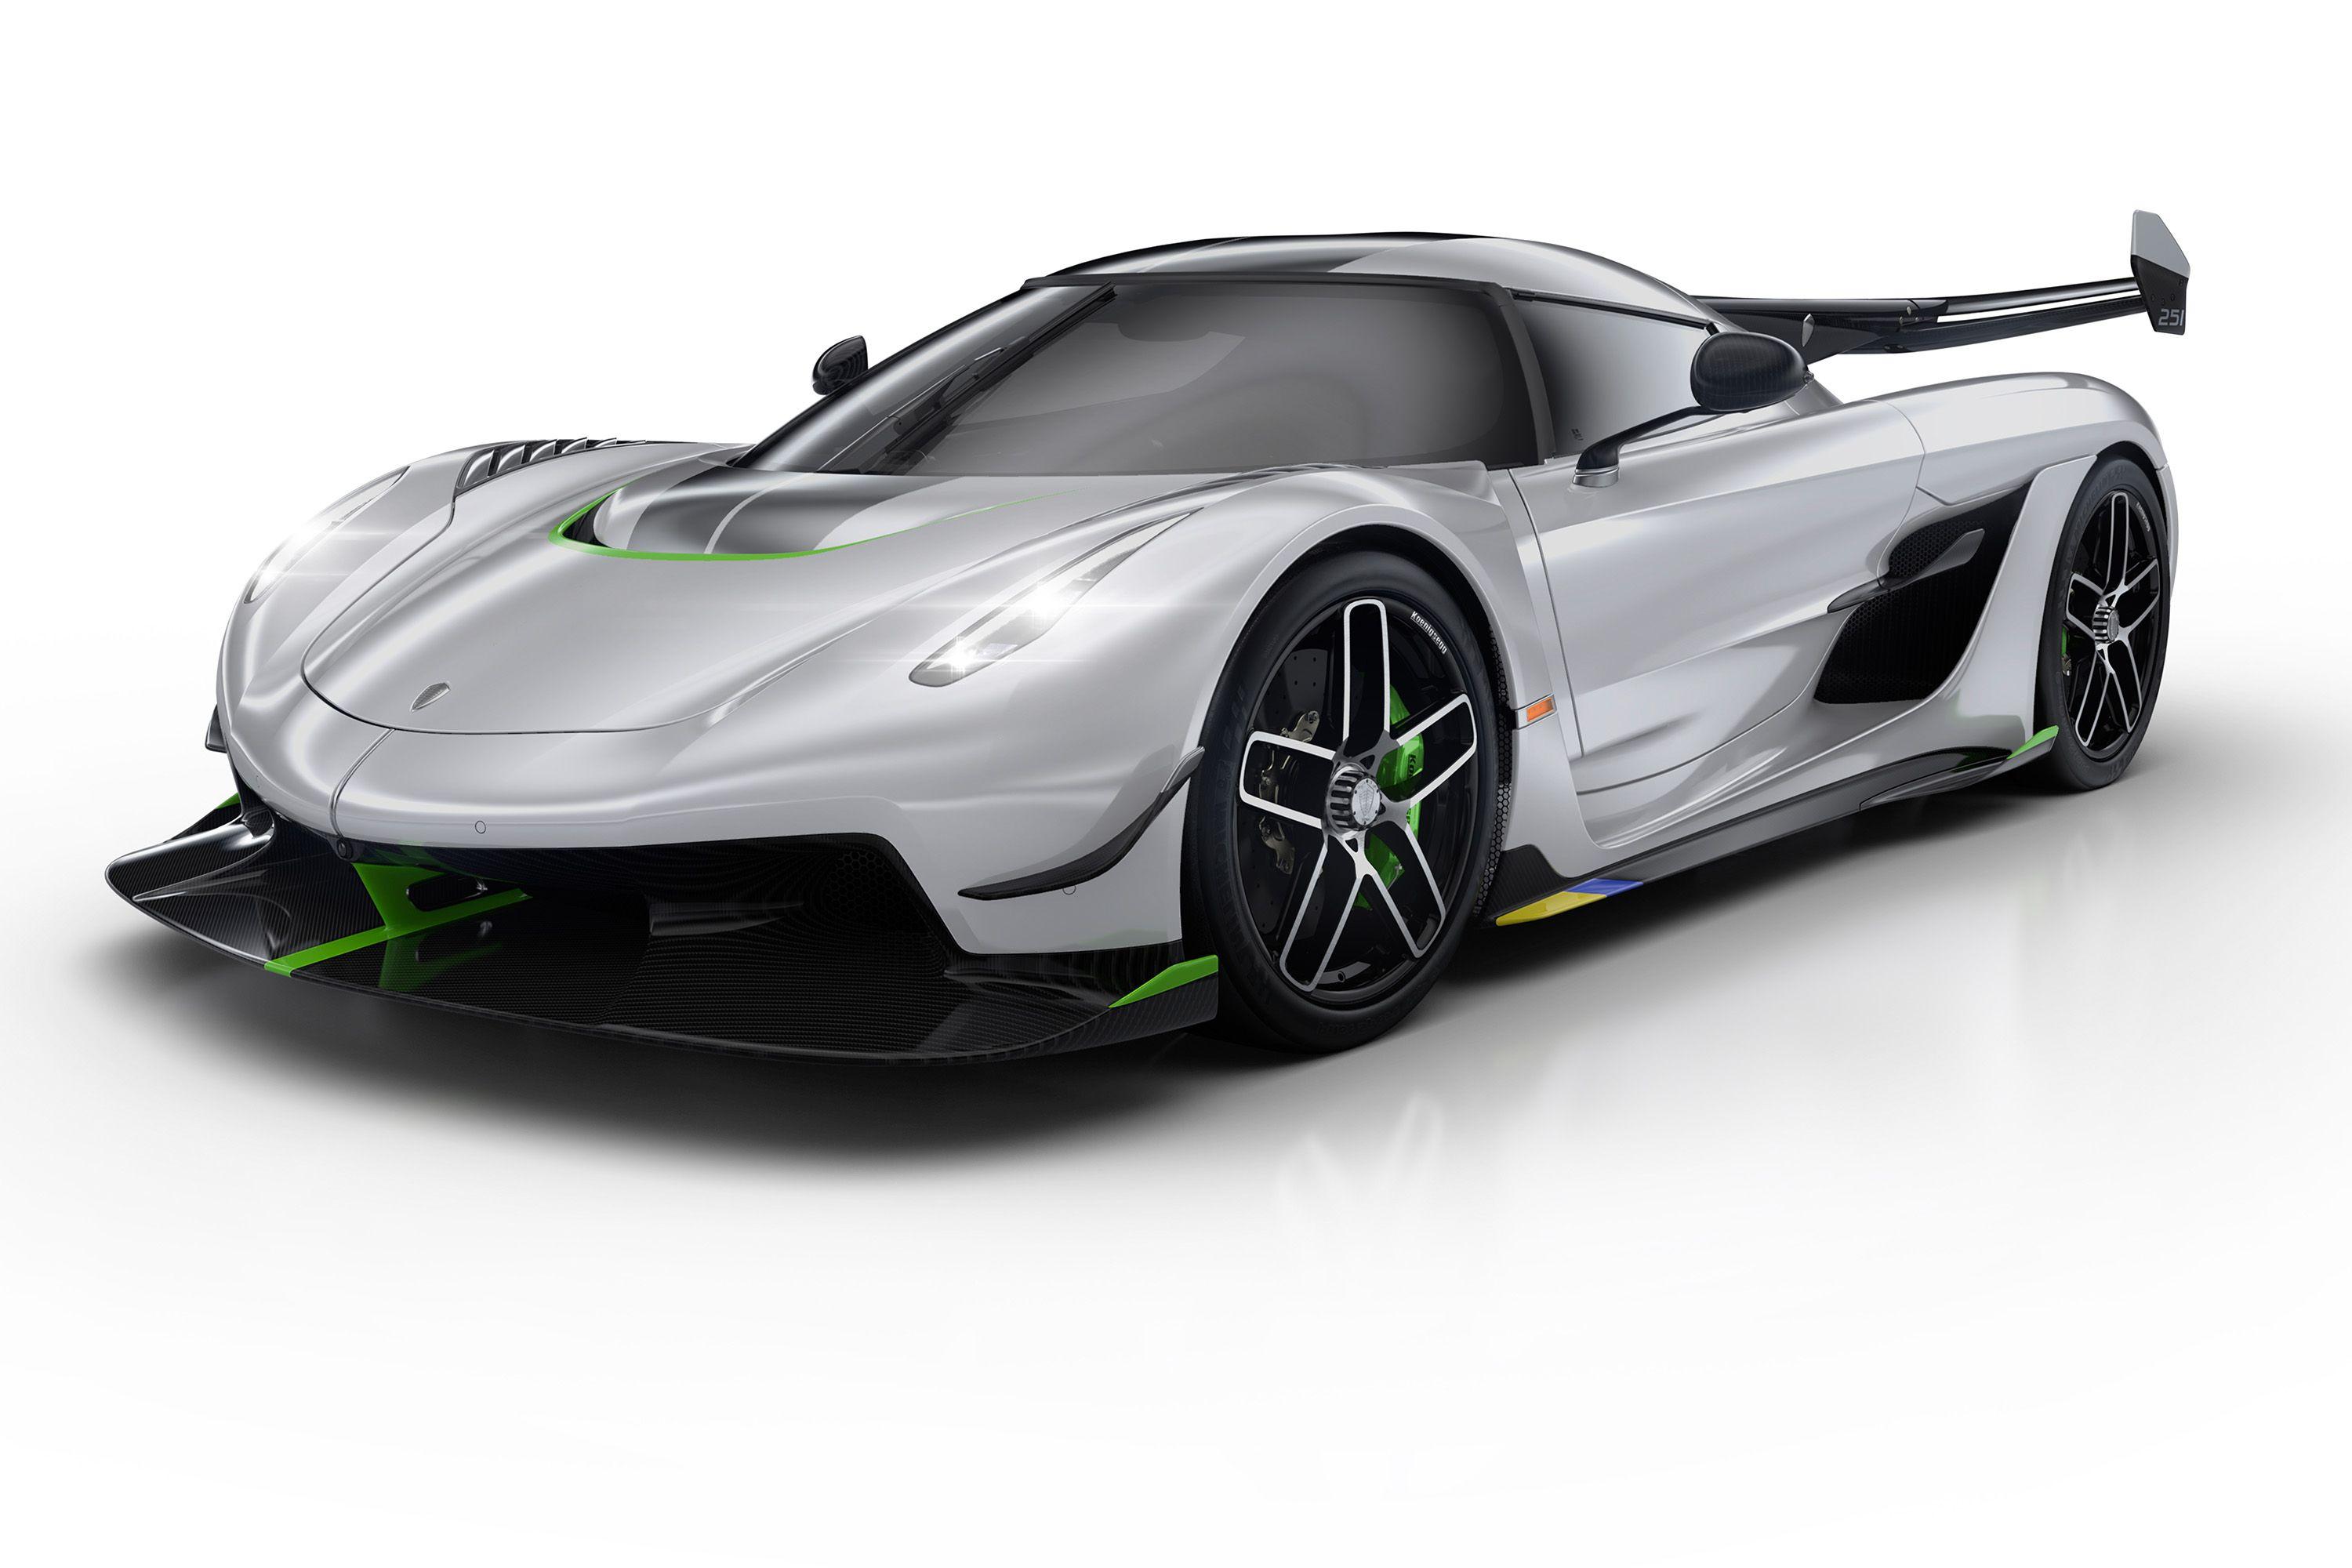 The Koenigsegg Jesko Has 1600 HP And Promises A 300 MPH Top